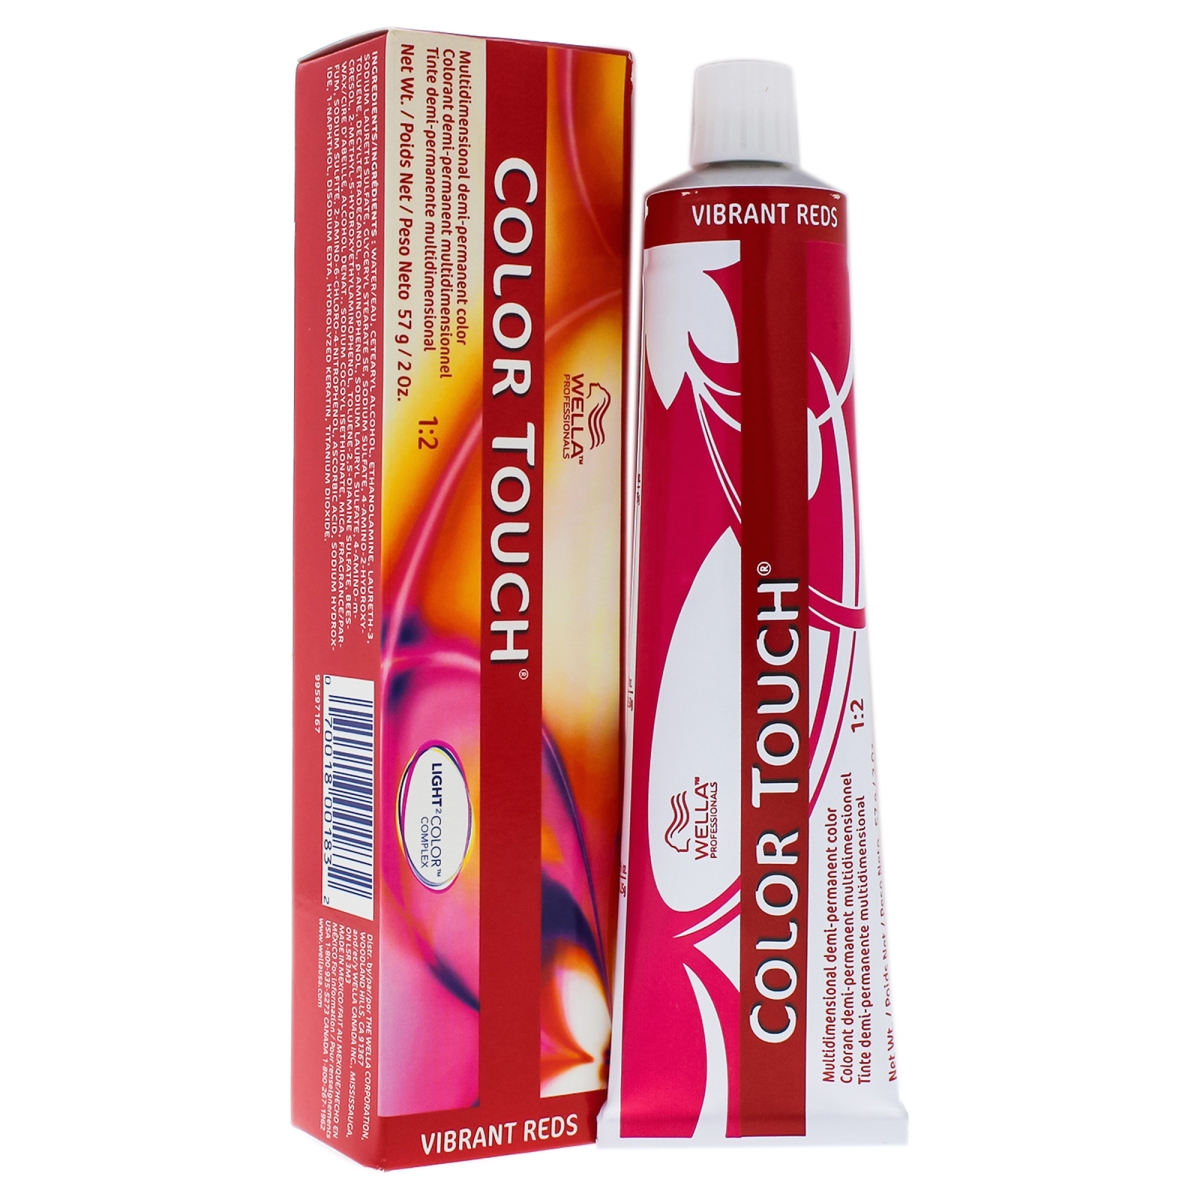 I0086480 Color Touch Demi & Permanent Hair Color For Unisex - 6 47 Dark Blonde & Red Brown - 2 Oz